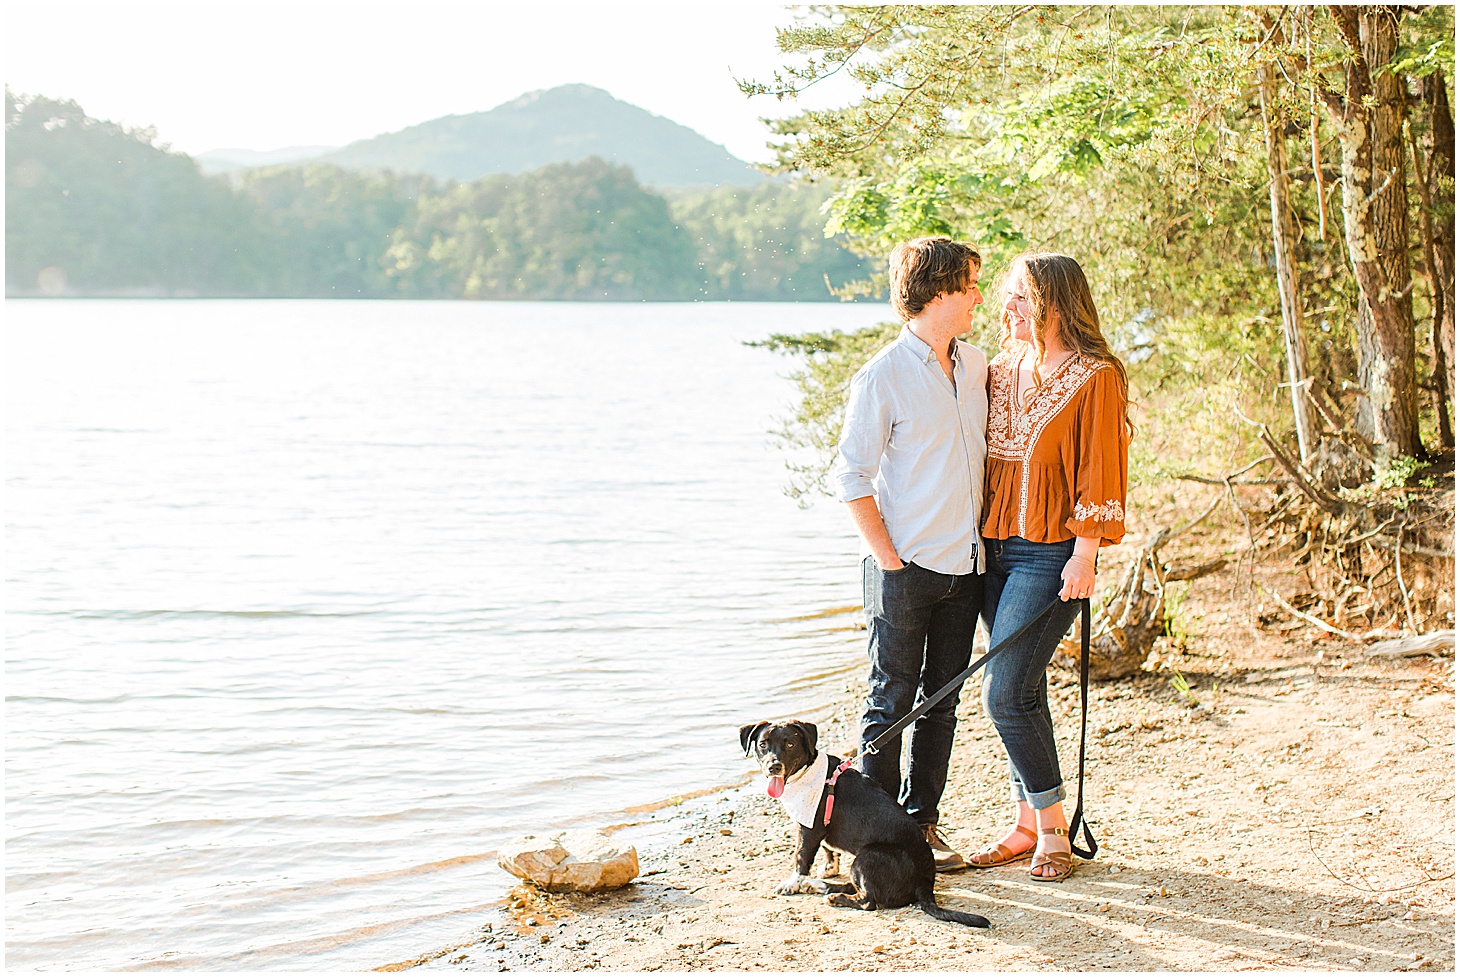 carvinscoveengagementsession_roanokeengagementsession_carvinscove_virginiawedding_virginiaweddingphotographer_vaweddingphotographer_photo_0015.jpg